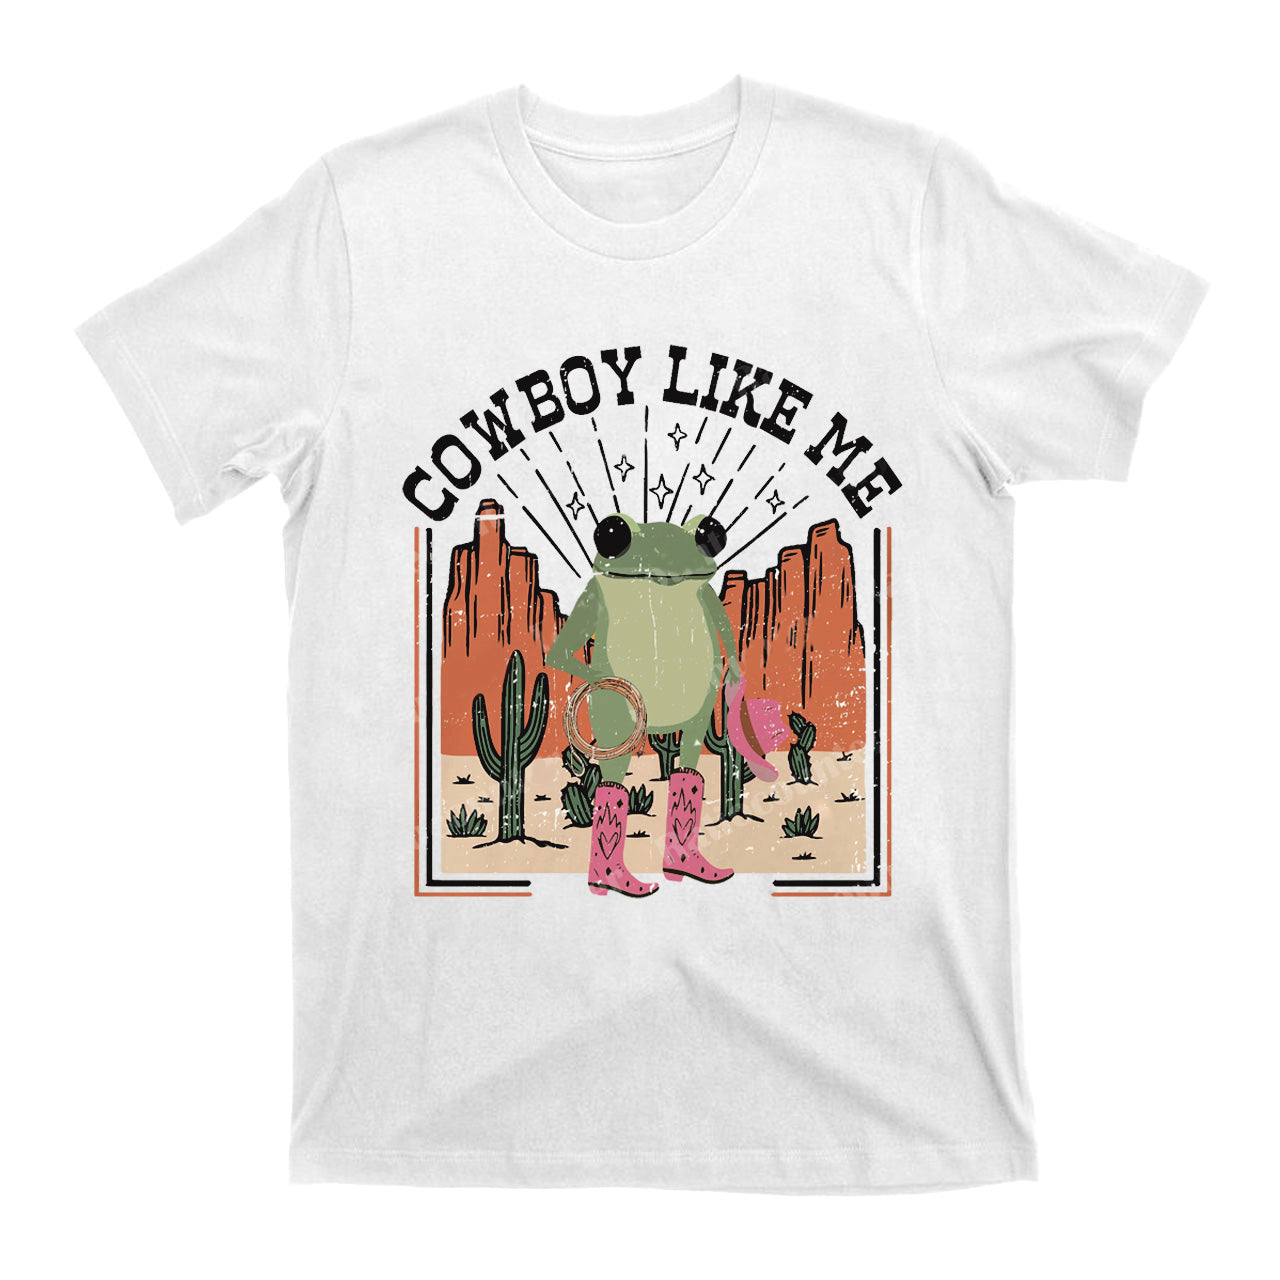 You're A Cowboy Like Me Tees For Cowgirl